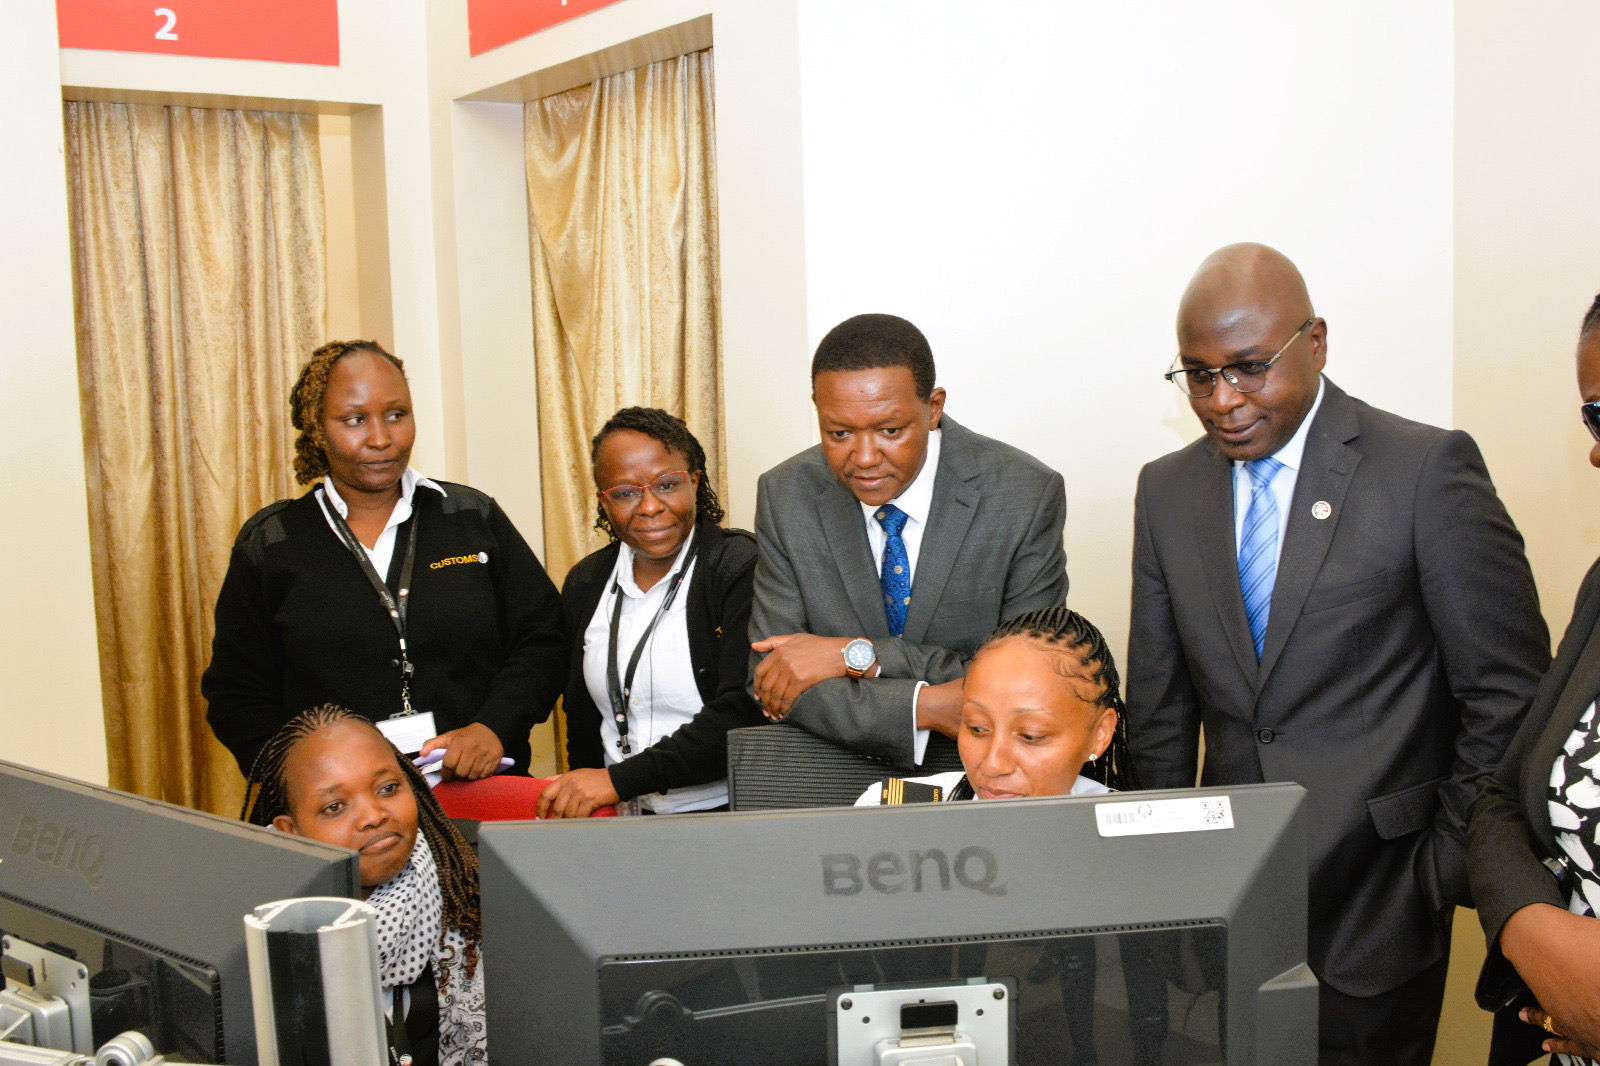 The Cabinet Secretary, Dr. Aflred Mutua (leaning on chair), having a look at some of the luggages being screened.